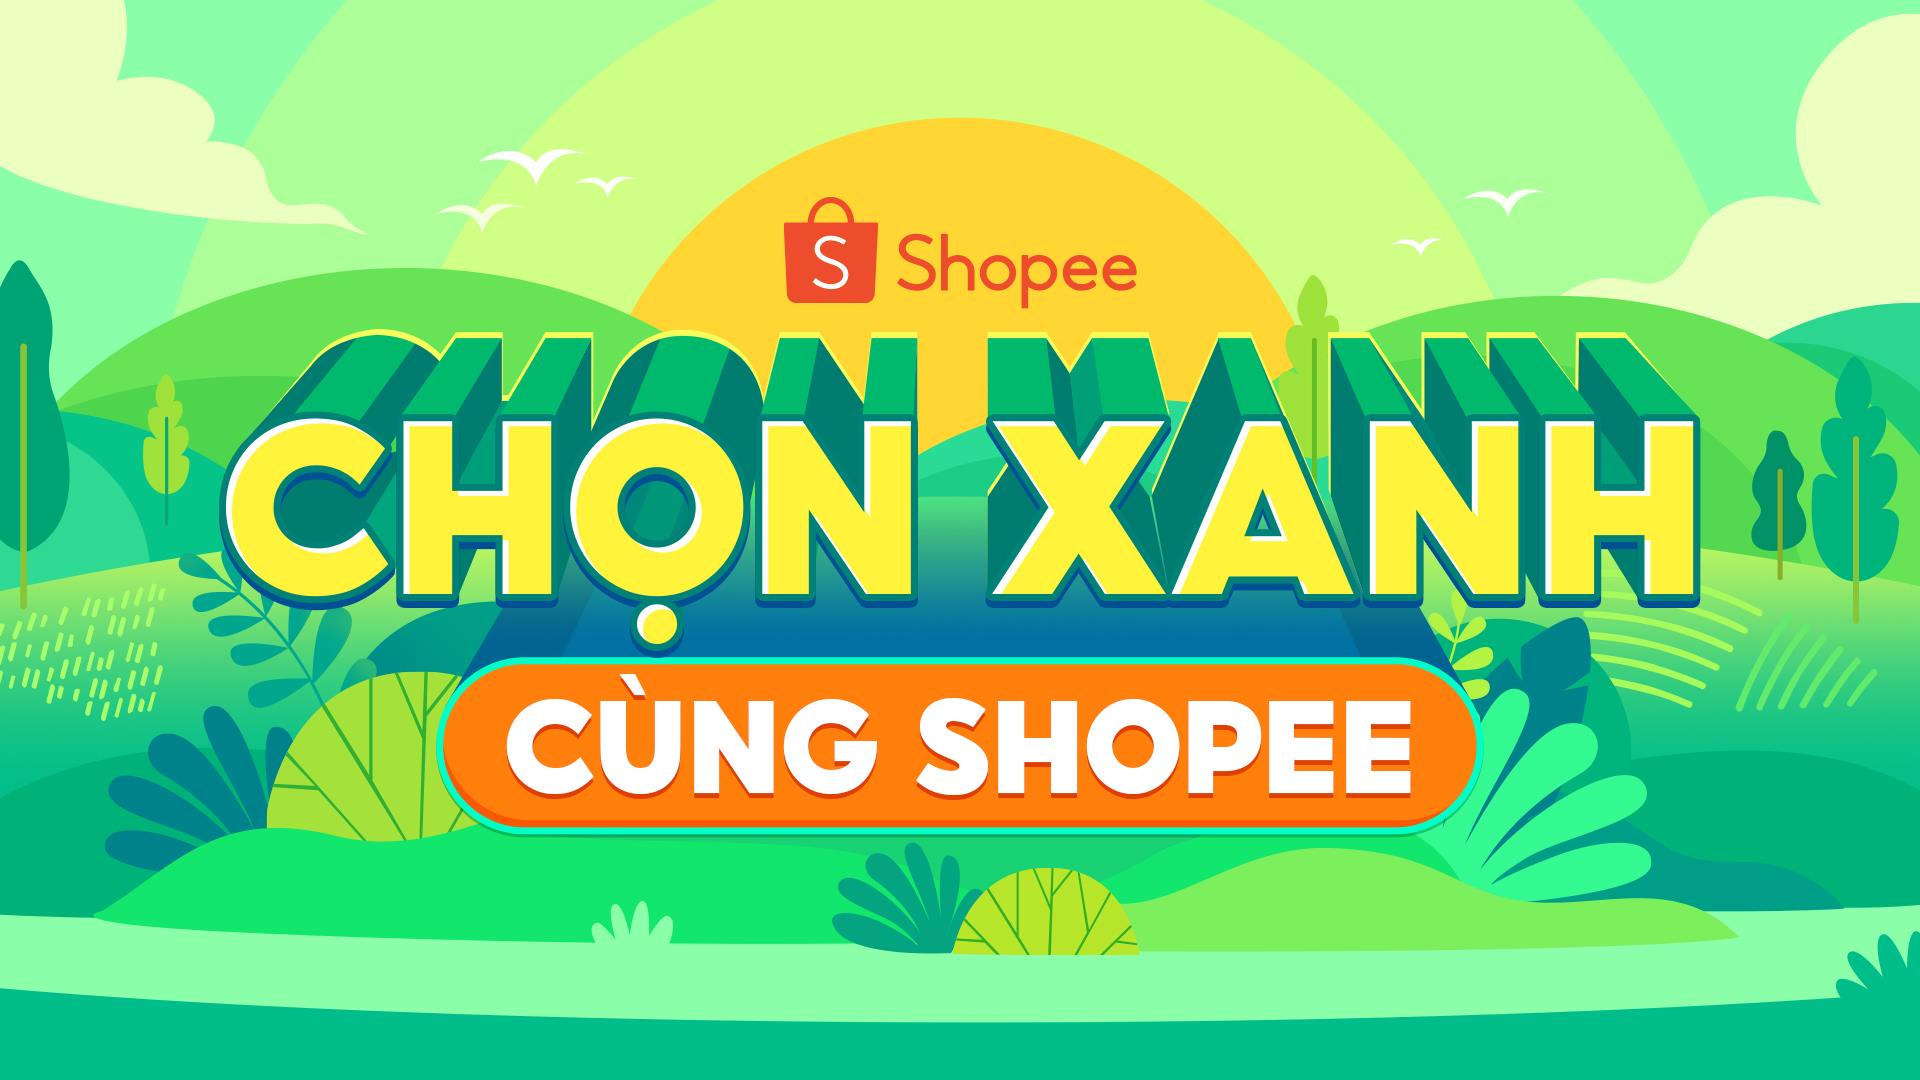 Choose Green Together with Shopee support green businesses and encourage sustainable lifestyles - Photo 1.